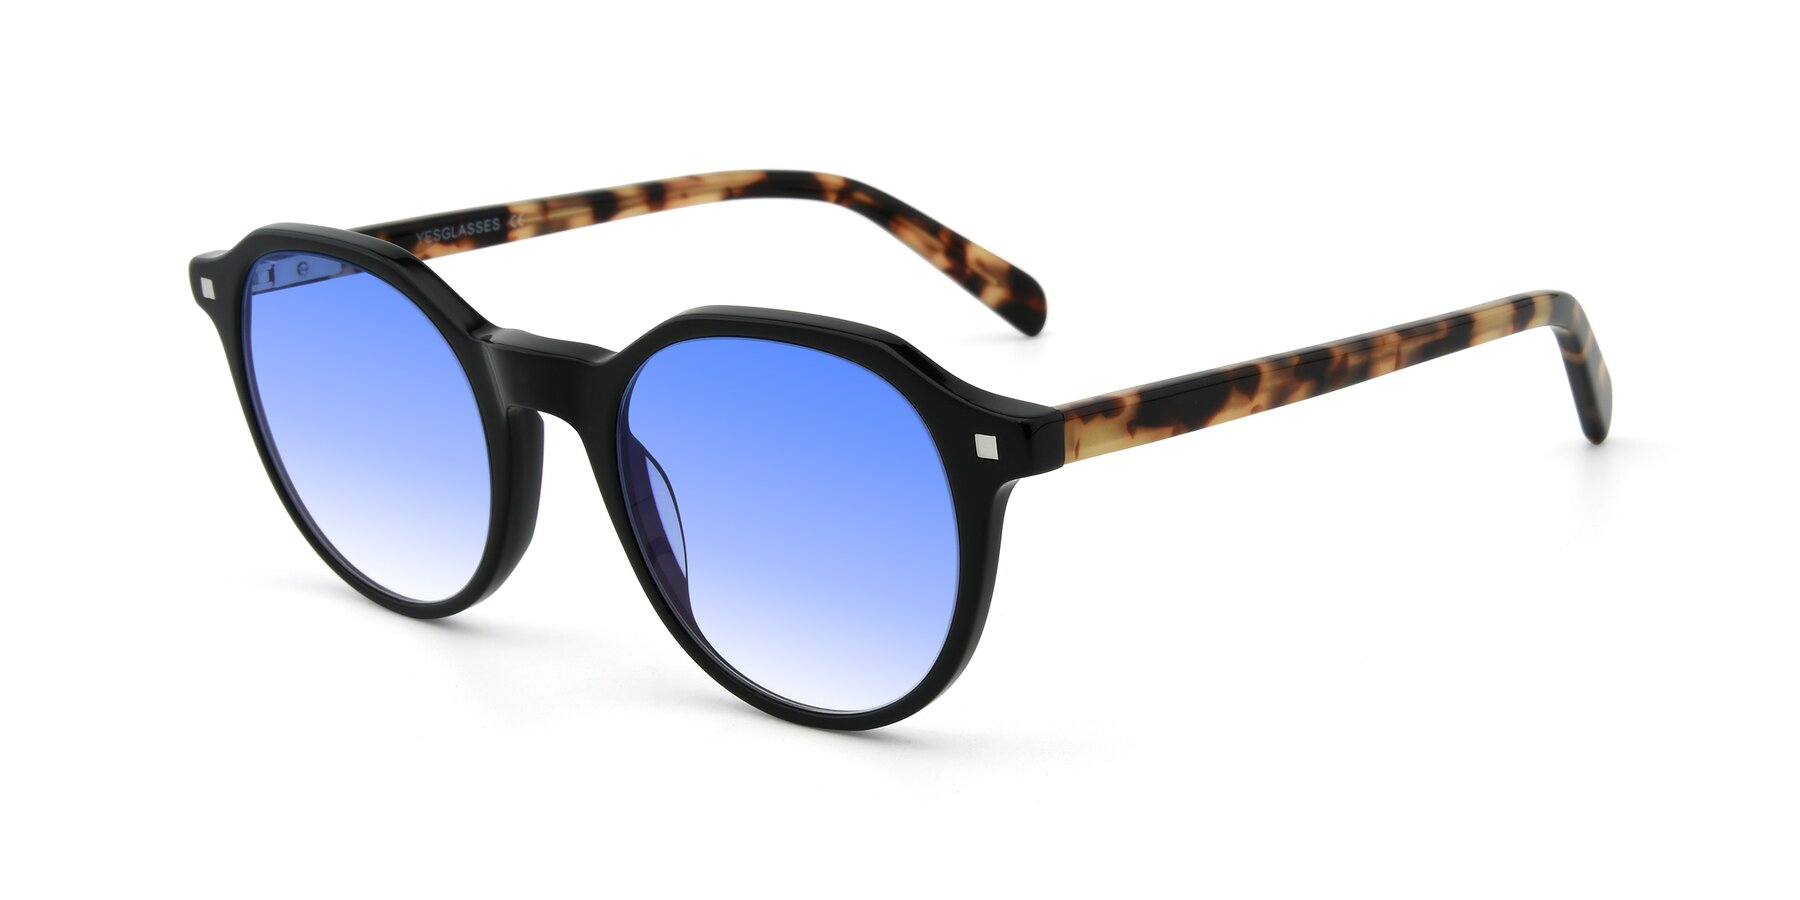 Angle of 17425 in Black with Blue Gradient Lenses